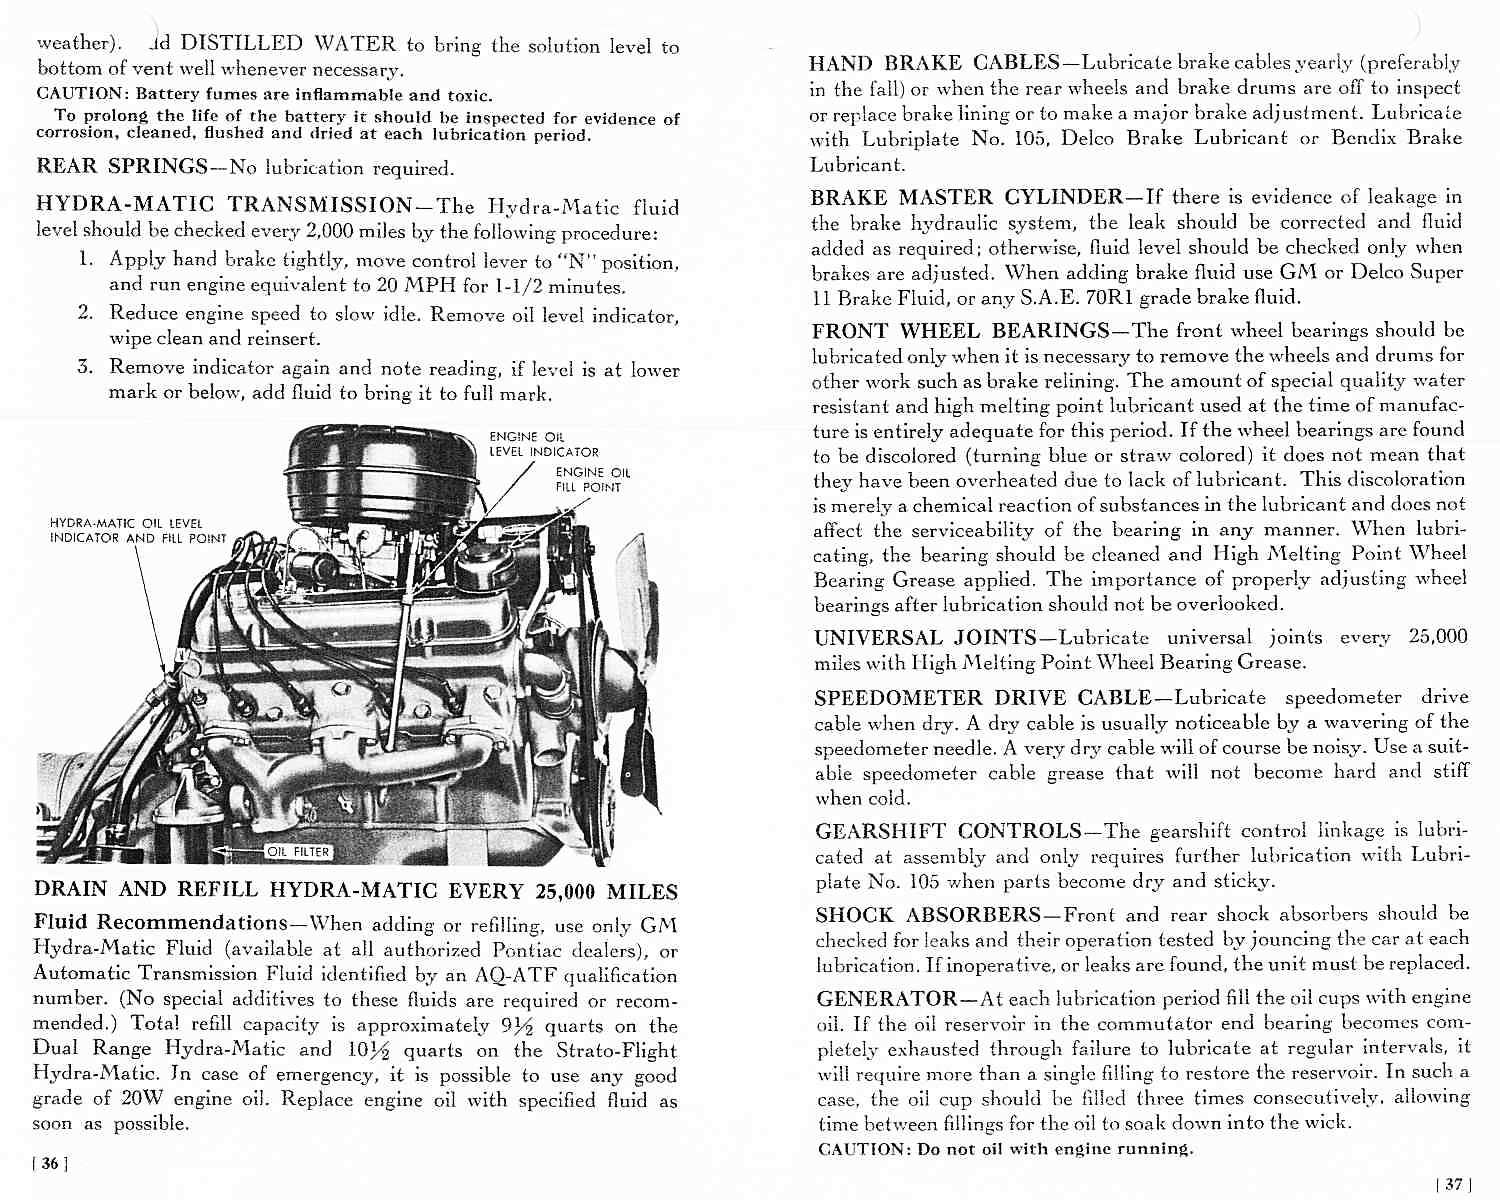 1956_Pontiac_Owners_Guide-36-37